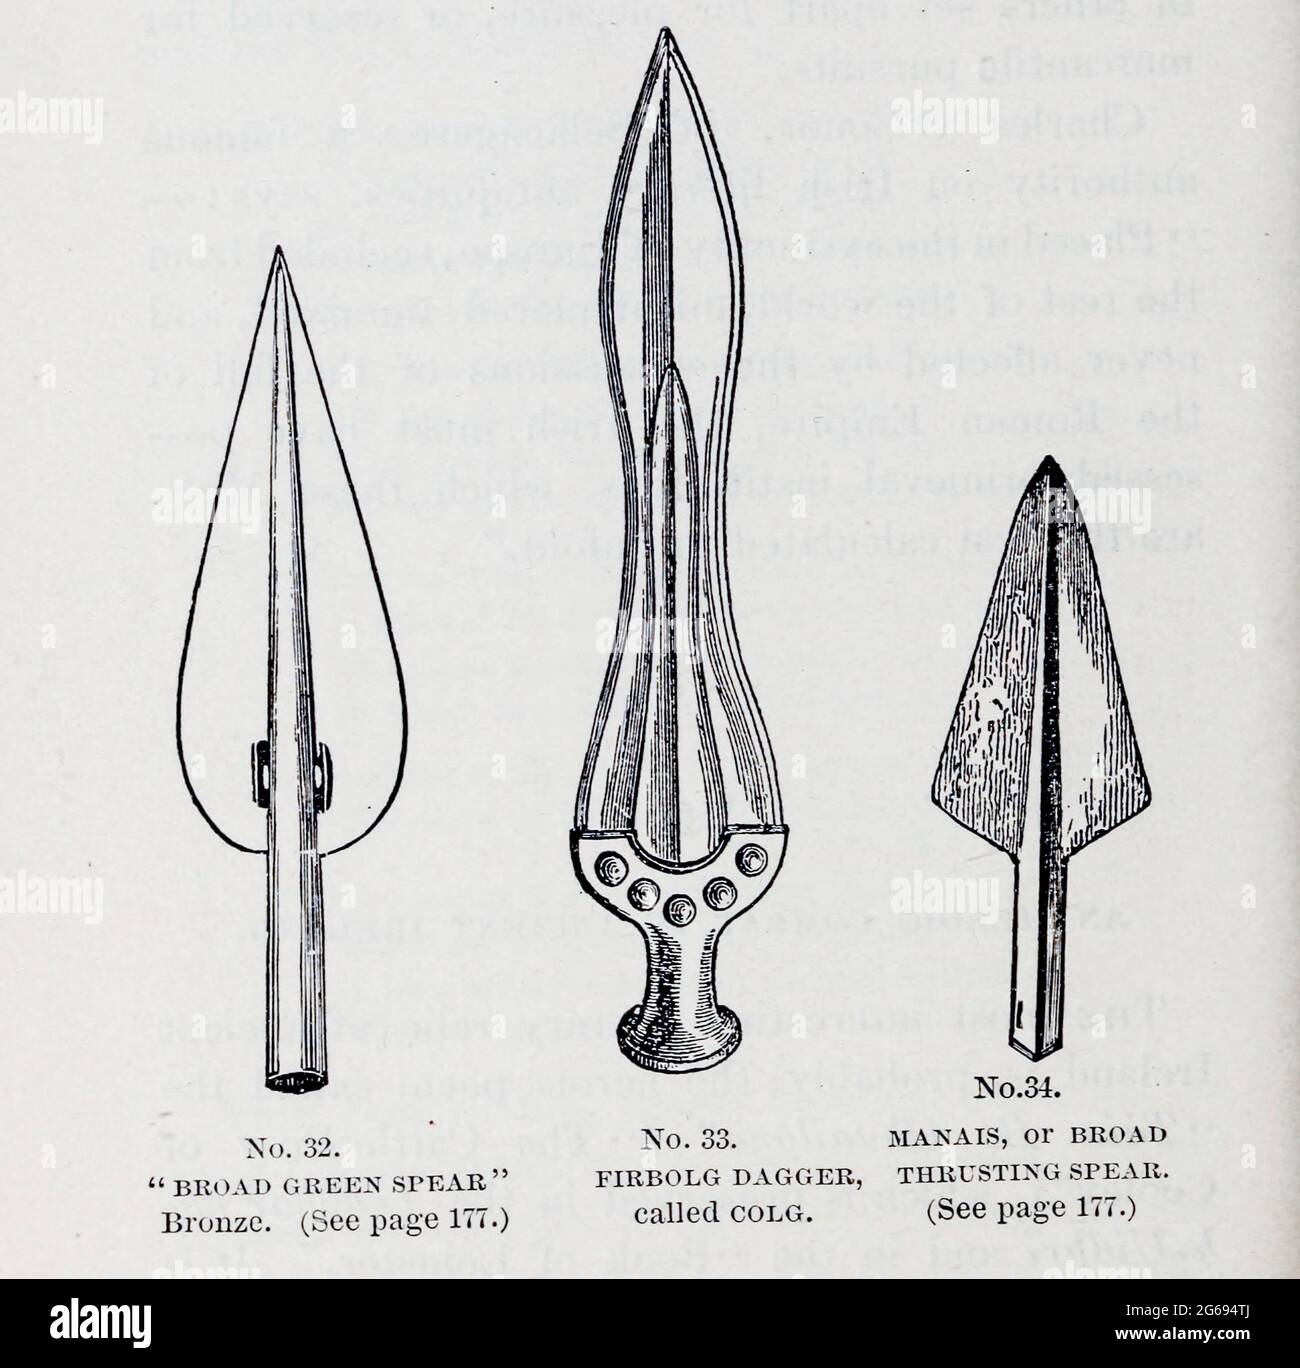 Ancient weapons spearheads and daggers From the book  ' Athletics and manly sport ' by John Boyle O'Reilly, 1844-1890 Published in Boston, by Pilot publishing company in 1890. DEDICATED TO THOSE WHO BELIEVE THAT A LOVE FOR INNOCENT SPORT, PLAYFUL EXERCISE. AND ENJOYMENT OF NATURE, IS A BLESSING INTENDED NOT ONLY FOR THE YEARS OF BOYHOOD, BUT FOR THE WHOLE LIFE OF A MAN Stock Photo